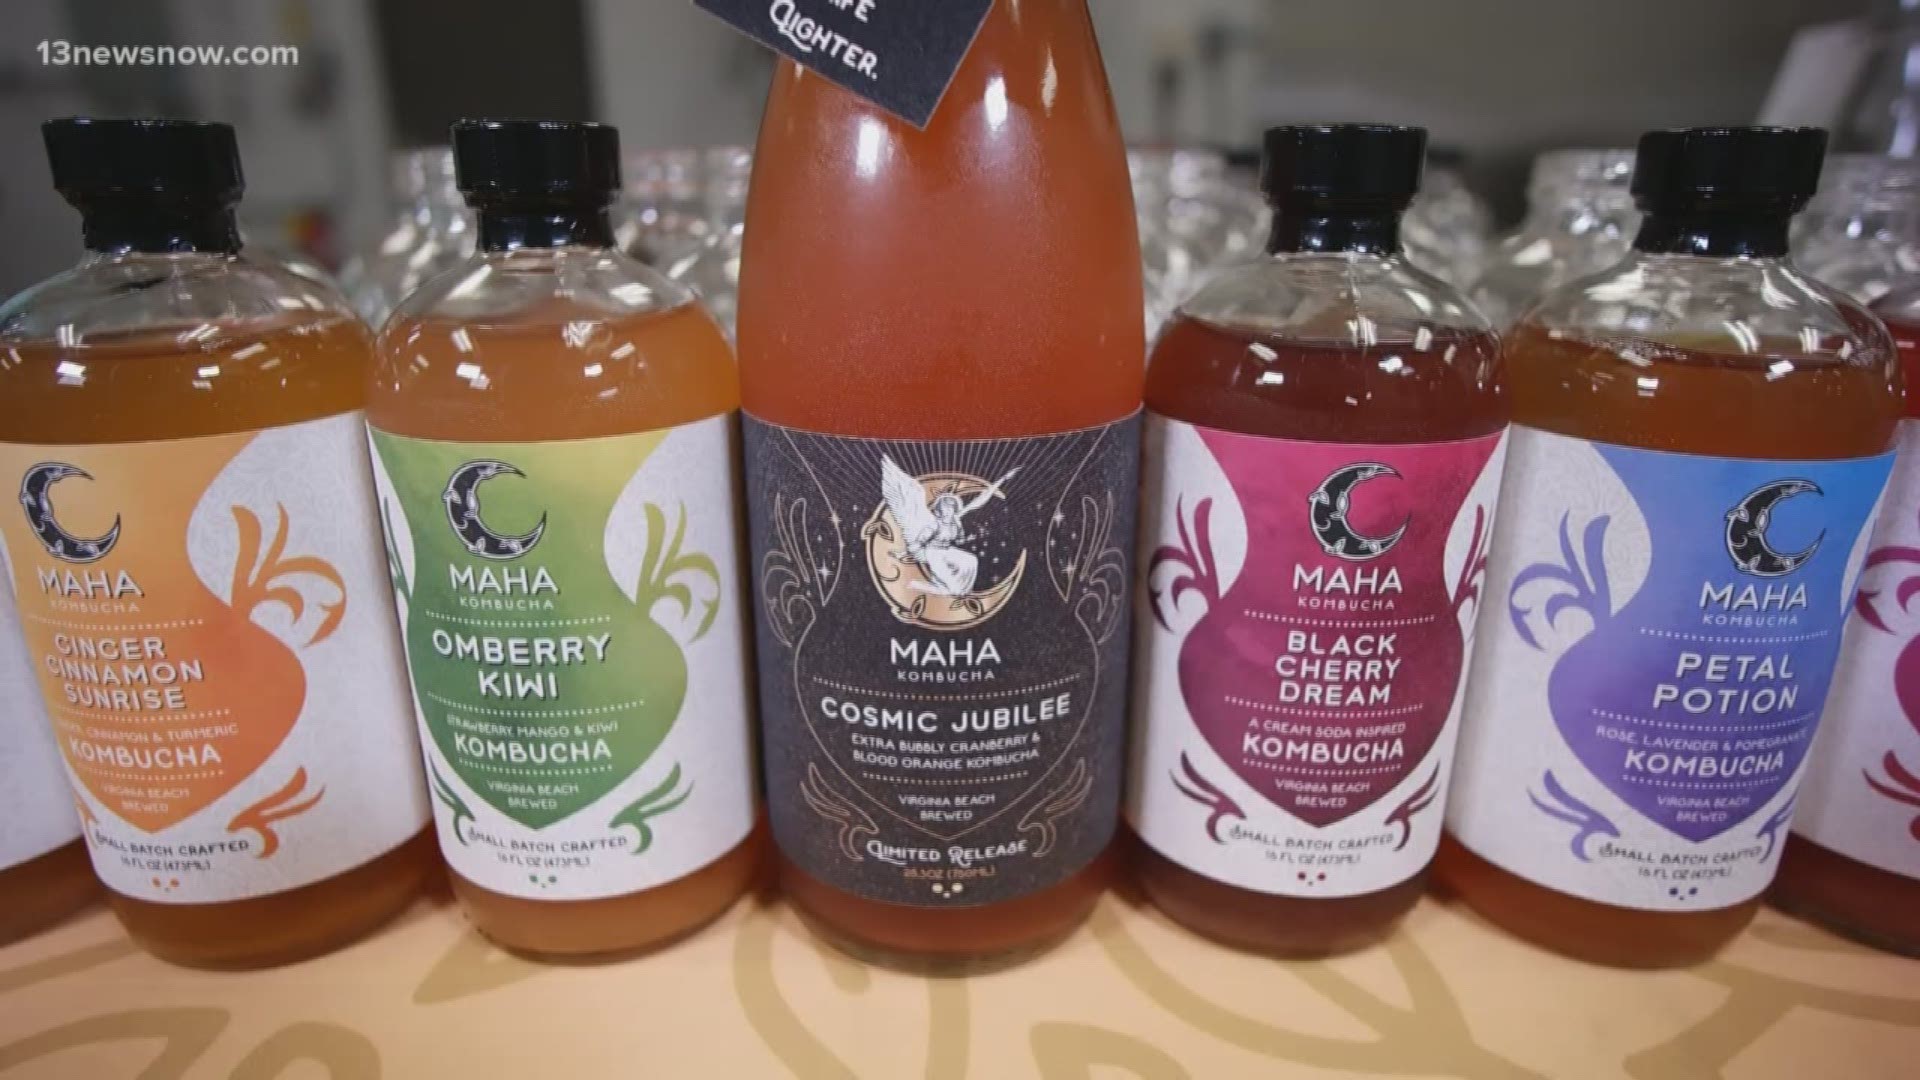 Kombucha is a popular drink that's filled with good stuff for your body, like probiotics. A Virginia Beach couple started Maha Kombucha to make the drink.